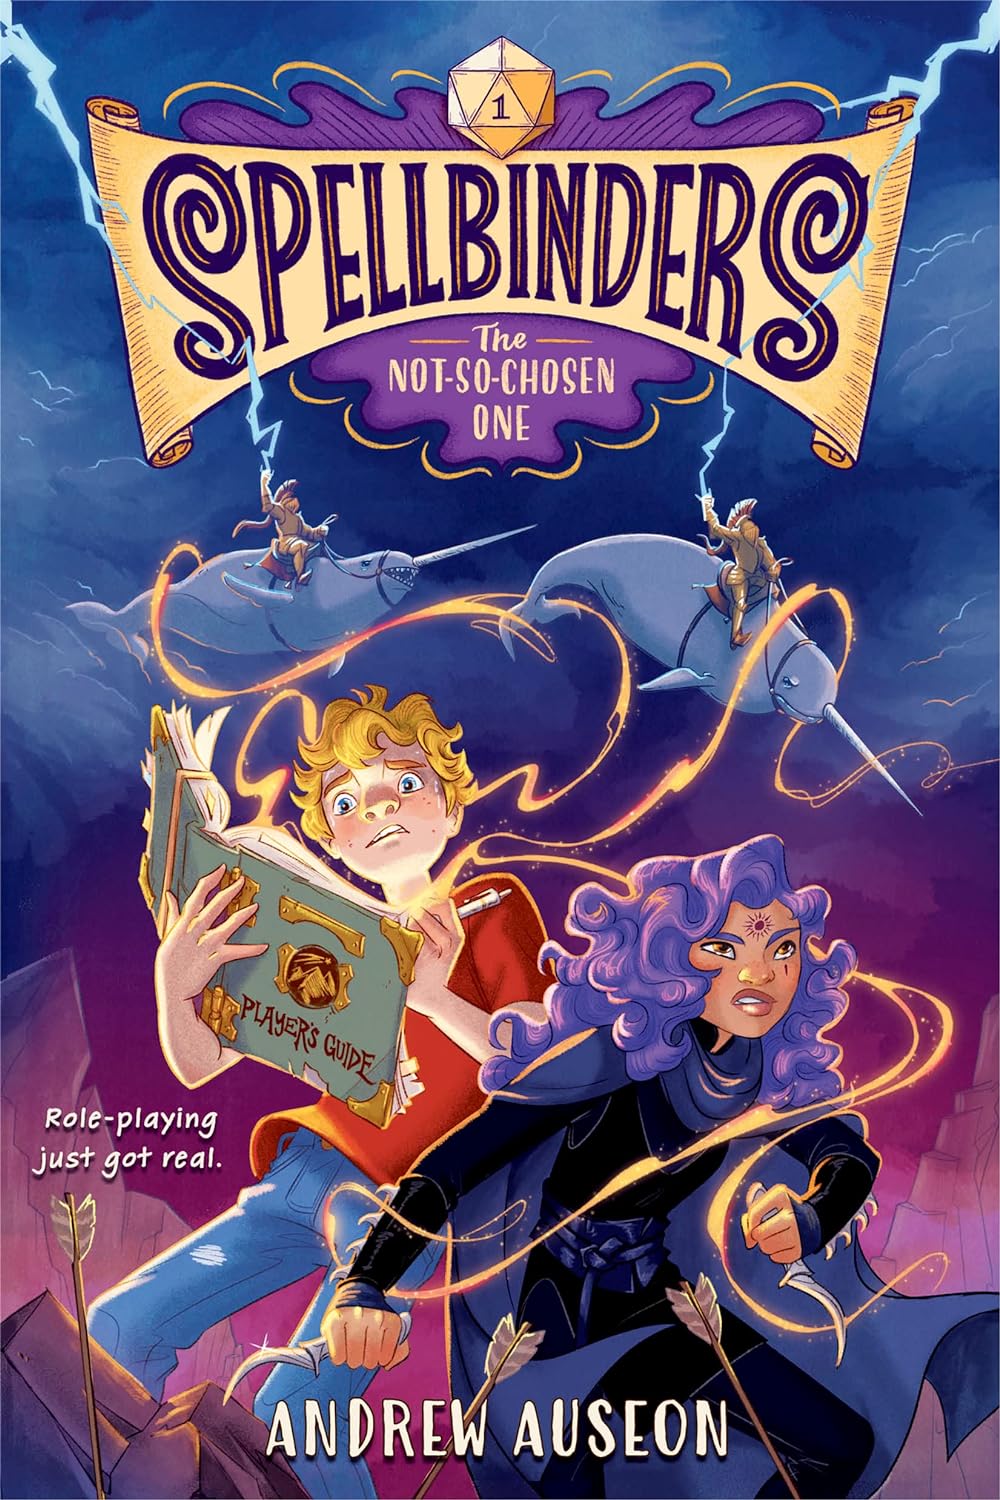 Image for "Spellbinders: The Not-So-Chosen One"